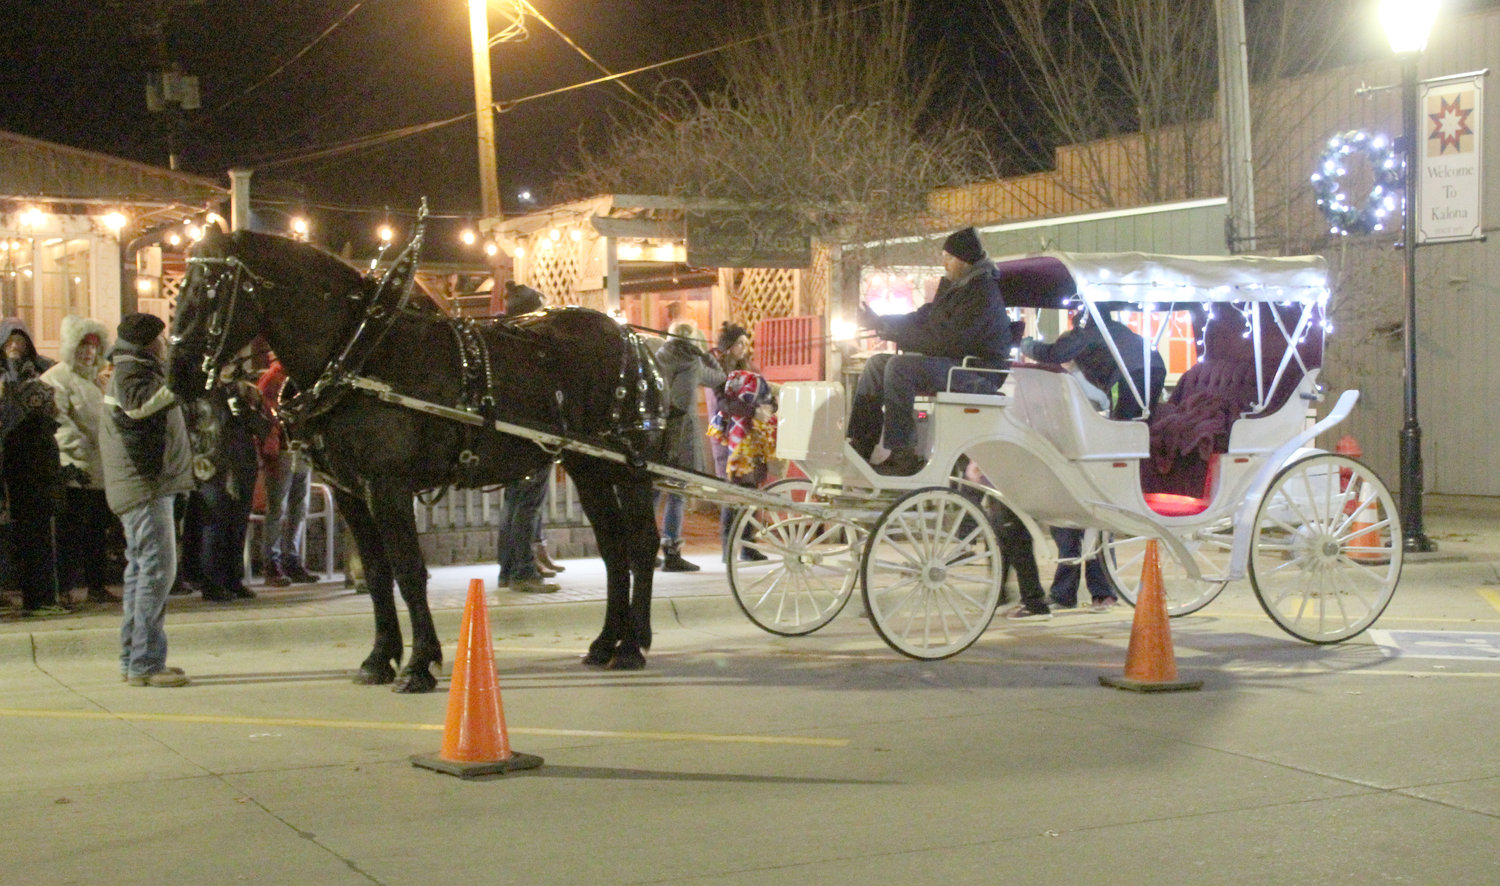 Carriage rides provided by Tuscan Moon Grill on Fifth capped off the day’s festivities.